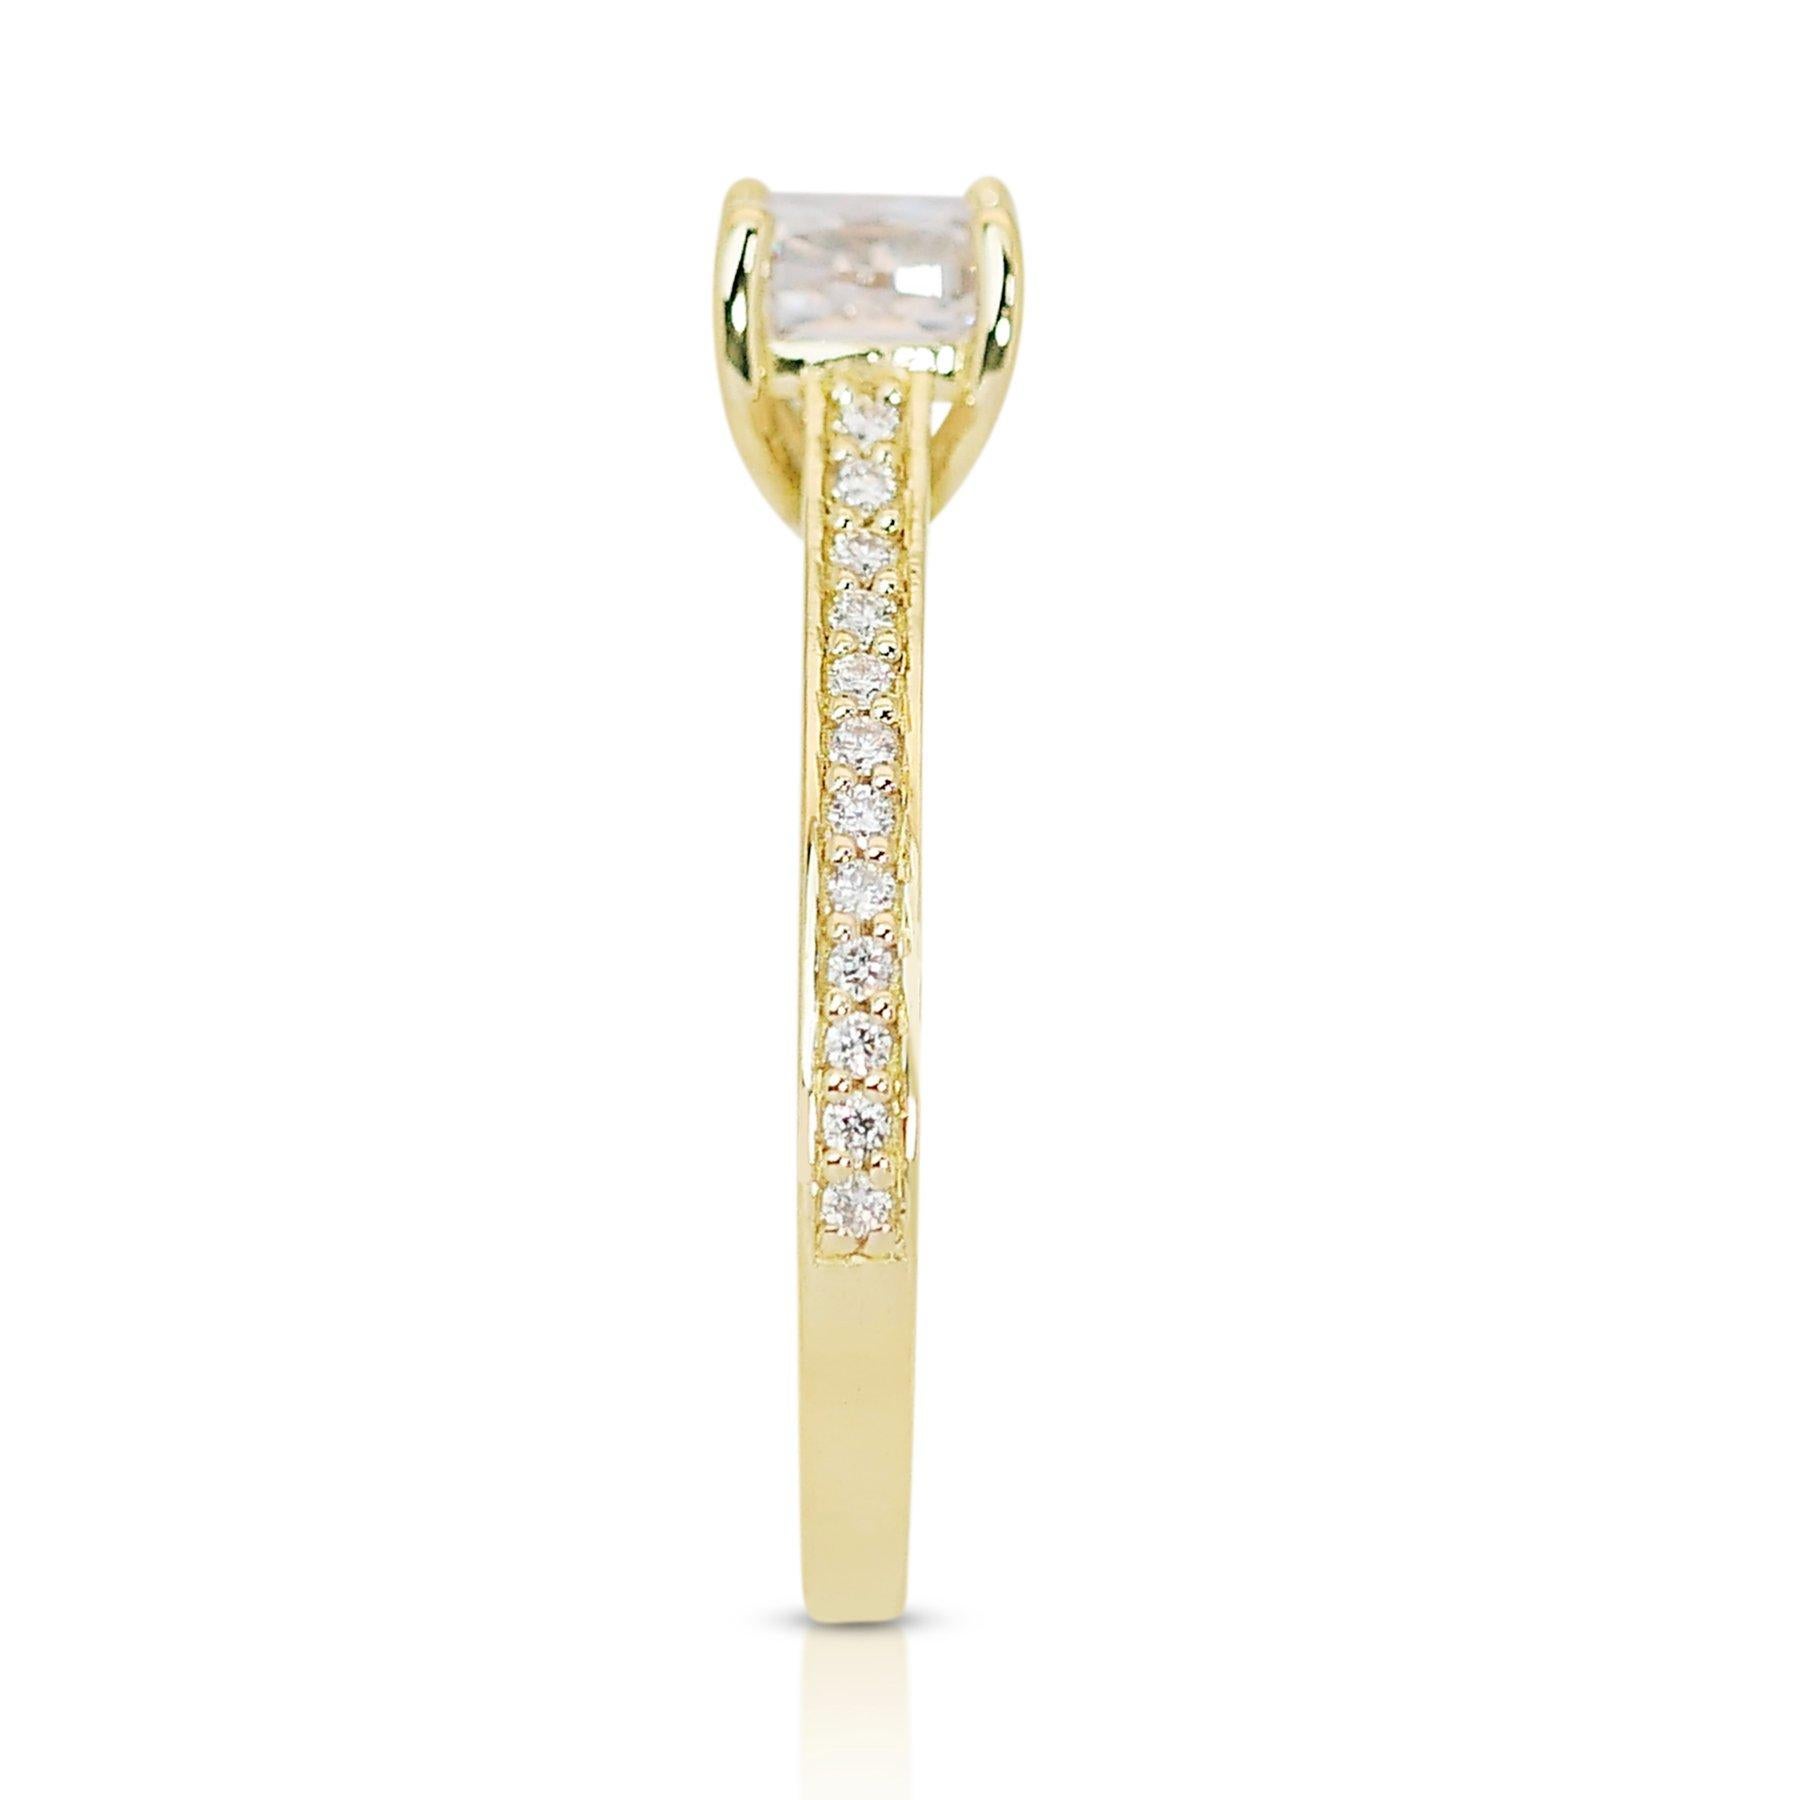 Luminous 1.17ct Diamond Pave Ring in 18k Yellow Gold – GIA Certified For Sale 2